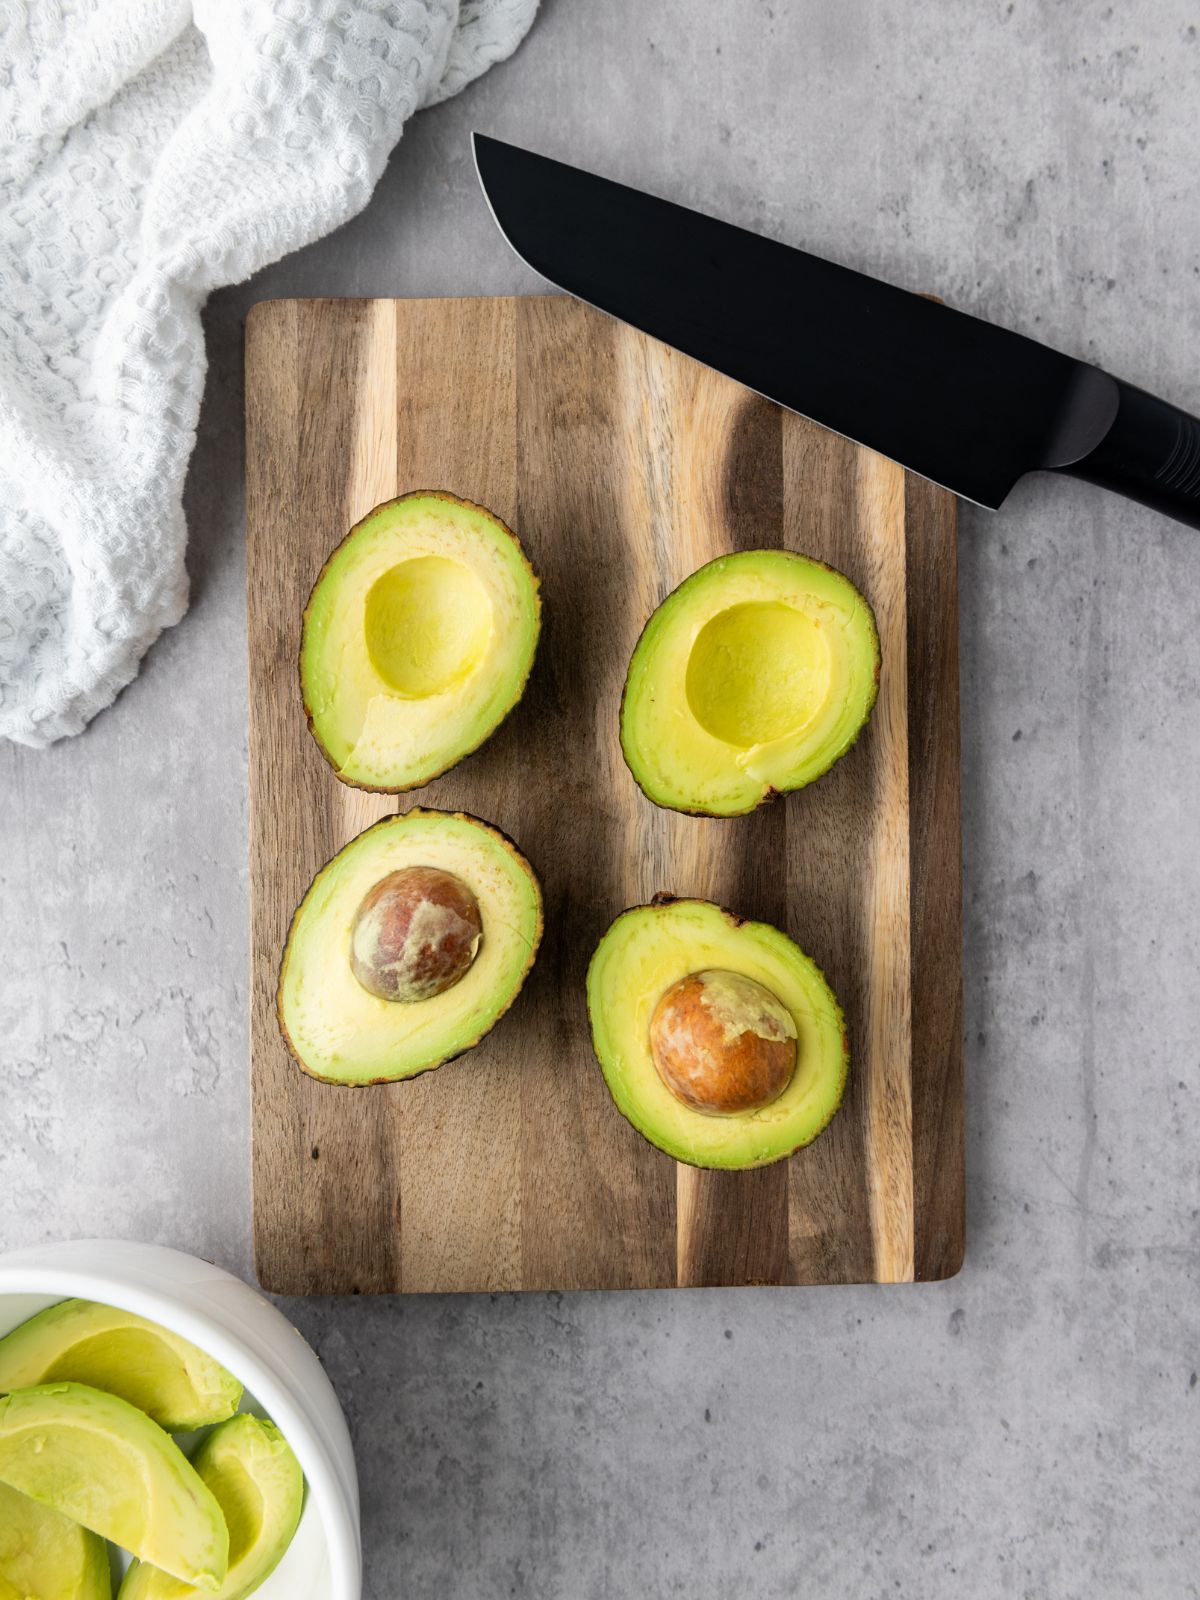 Two avocados sliced into four halves on a wooden cutting board.